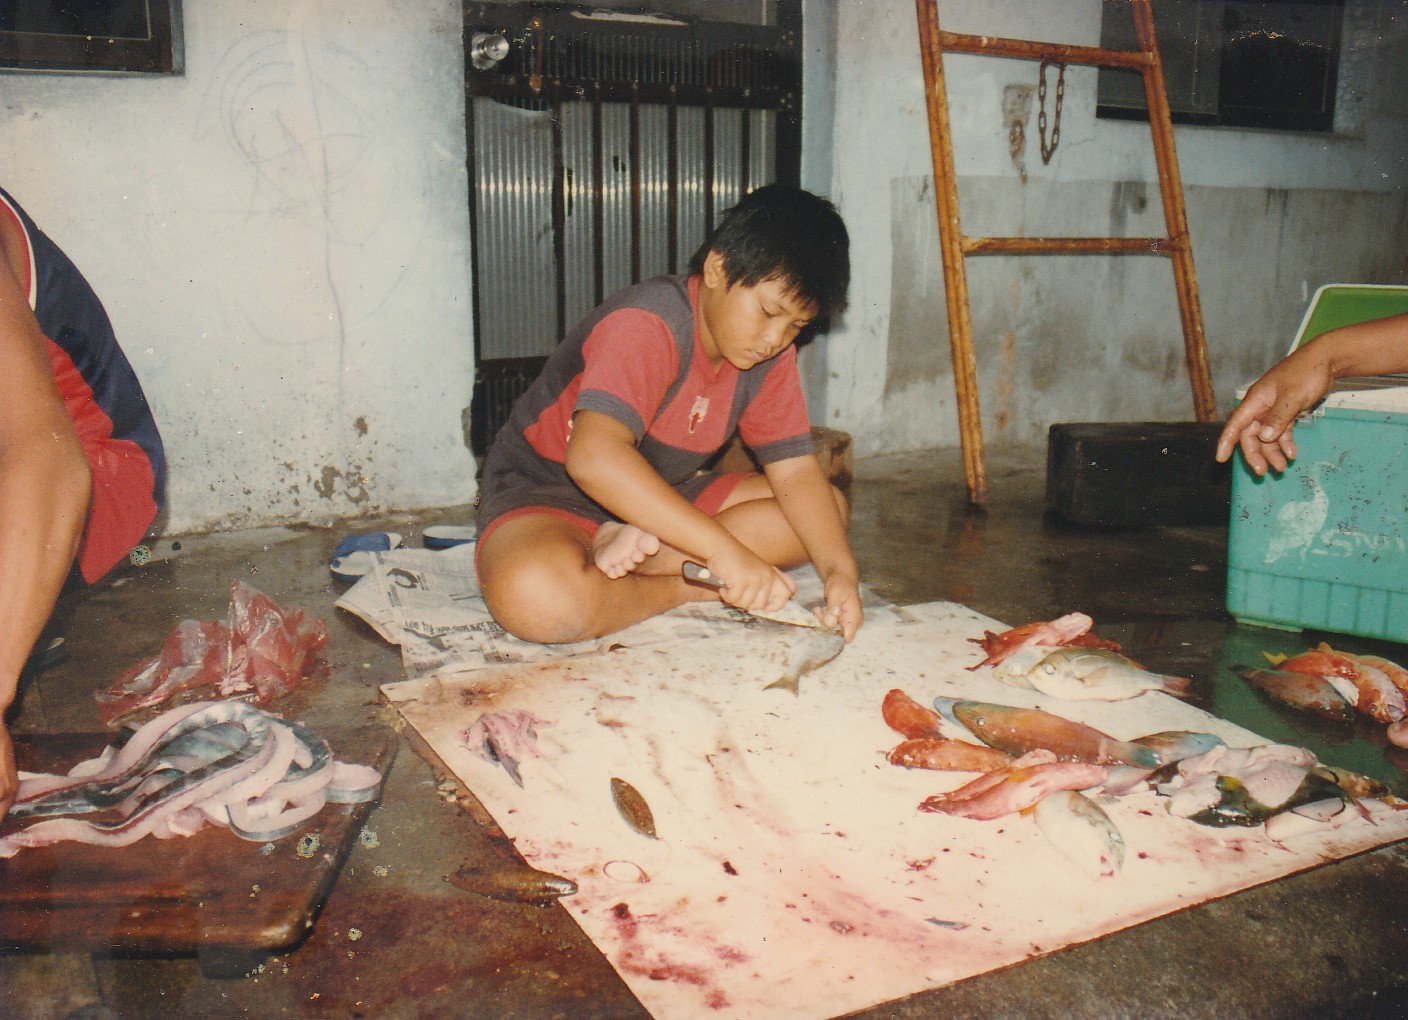 Child with skills for cutting fish for preparation